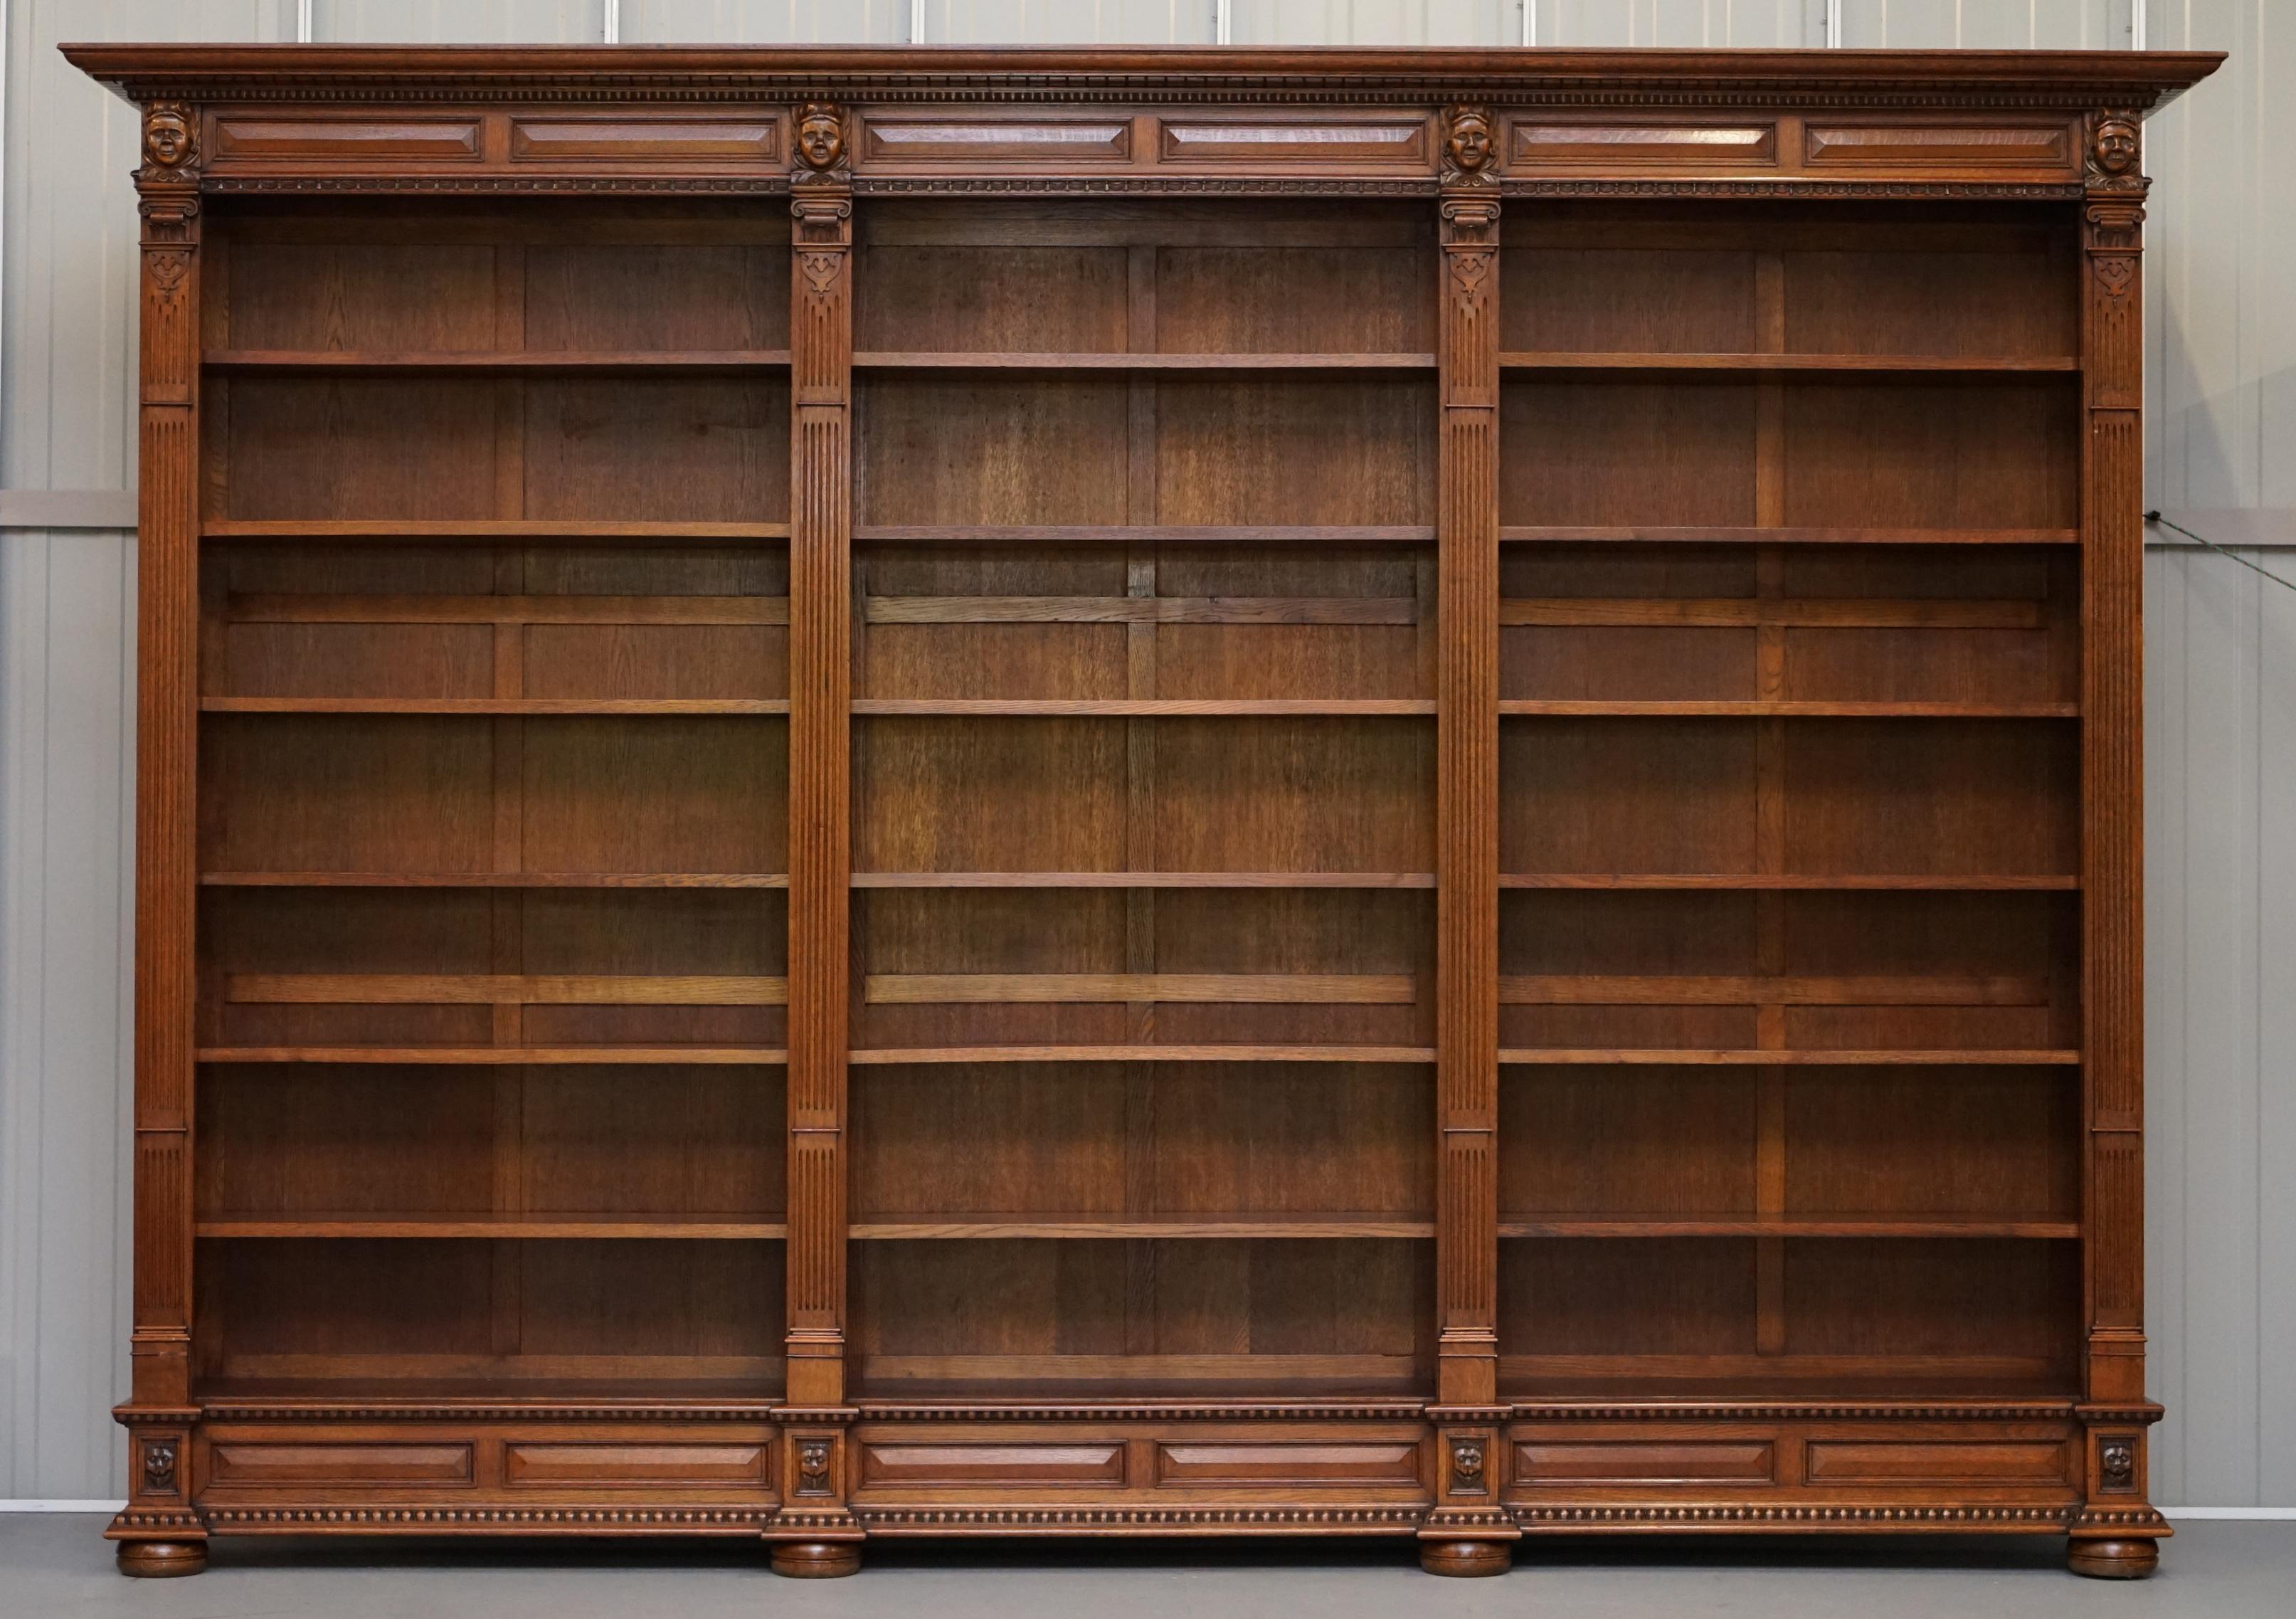 We are delighted to offer for sale this stunning hand carved solid oak Dutch triple bank Library bookcase circa 1940

This piece was hand made by a master craftsman in Bruges Belgium for a very successful Architect. Its part of a complete Library